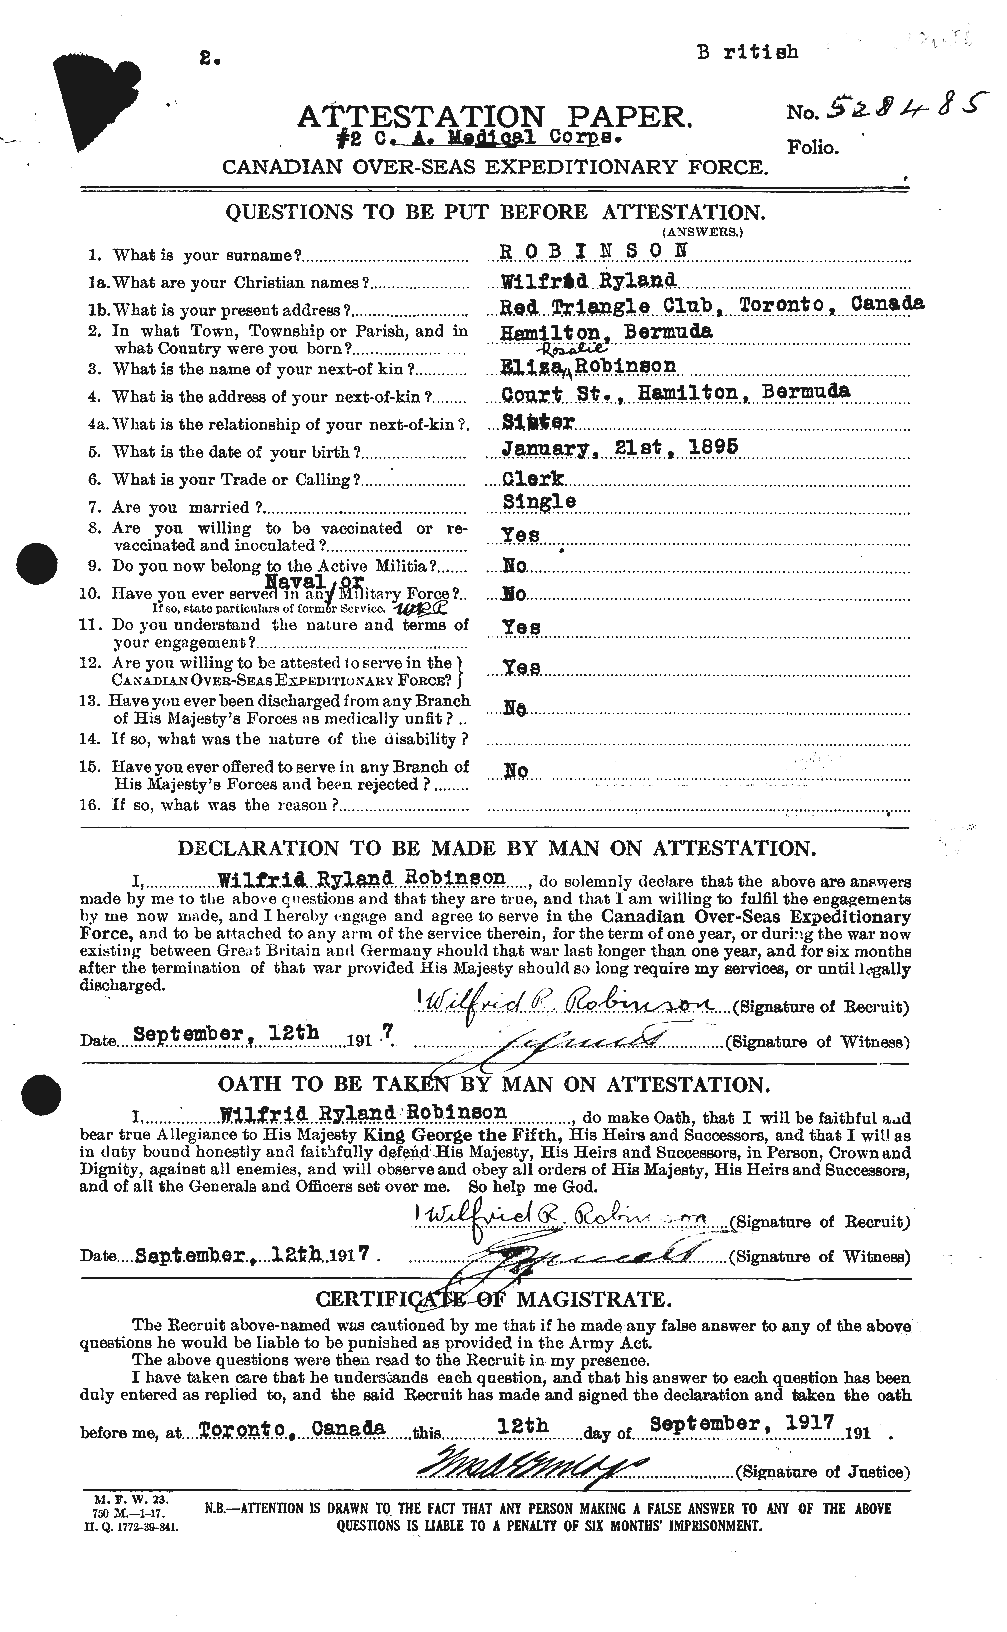 Personnel Records of the First World War - CEF 613937a